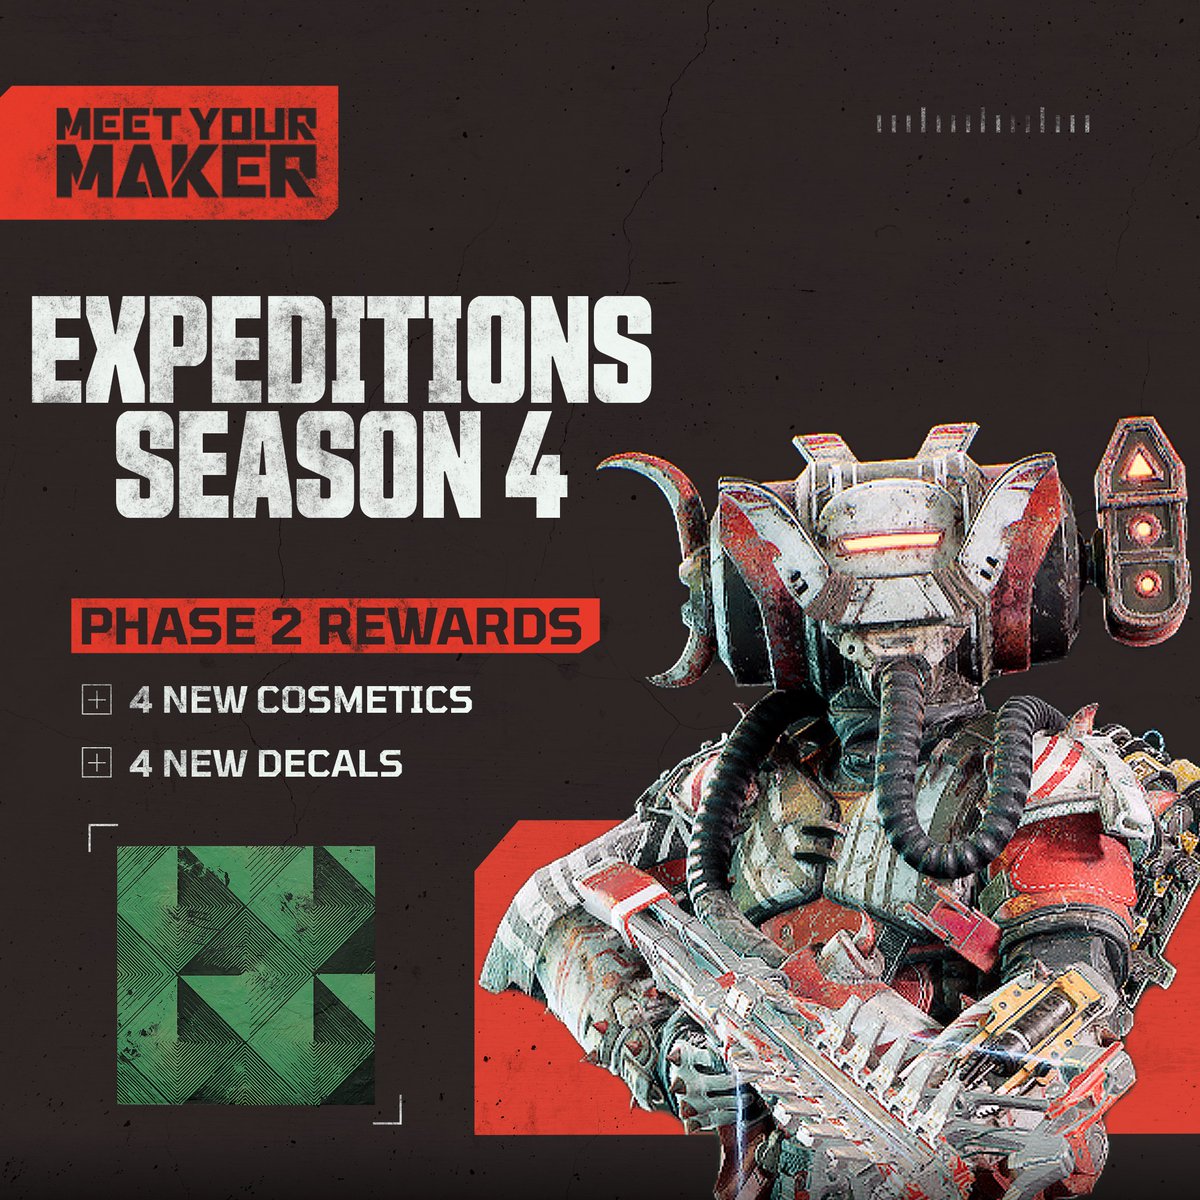 Custodians, the second phase of Expeditions Season 4 has begun, bringing with it an extended reward track with fresh cosmetics and decals to unlock!